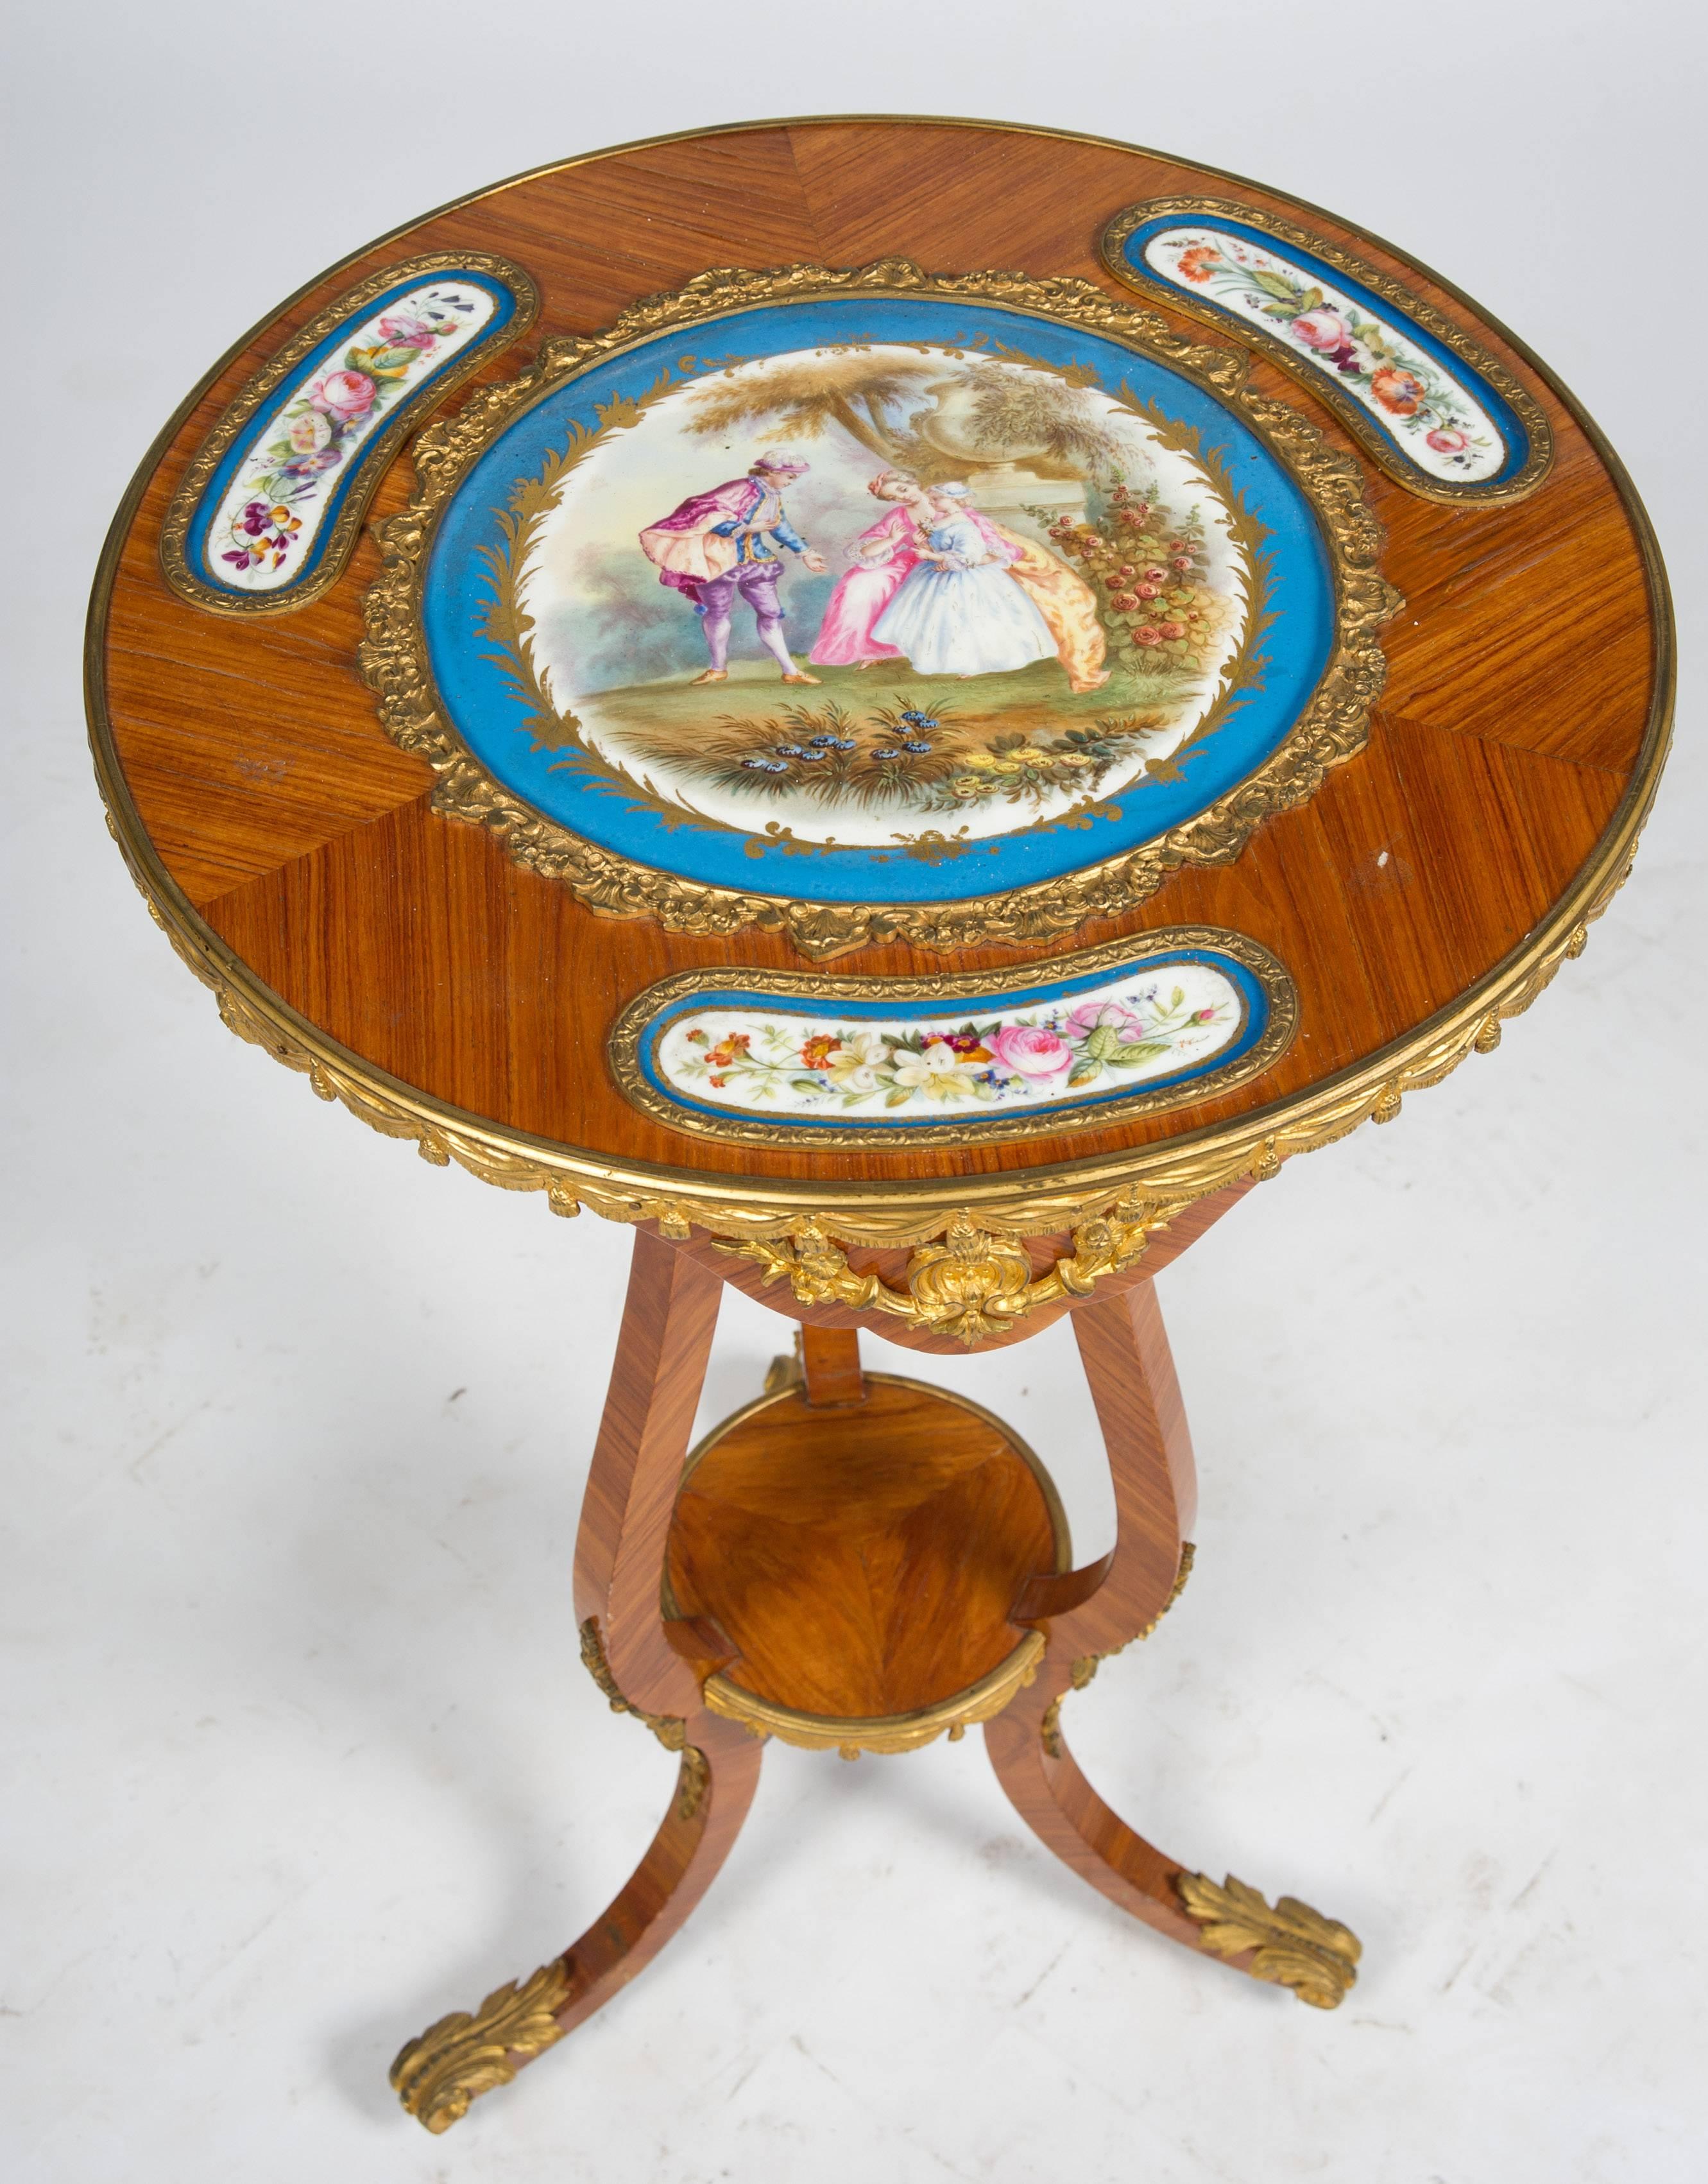 A charming 19th century French kingwood, ormolu-mounted occasional table with inset French 'Sevres' porcelain plaques to the top. The central plaque depicting a romantic scene, the others with flowers all within a turquoise border. Raised on three